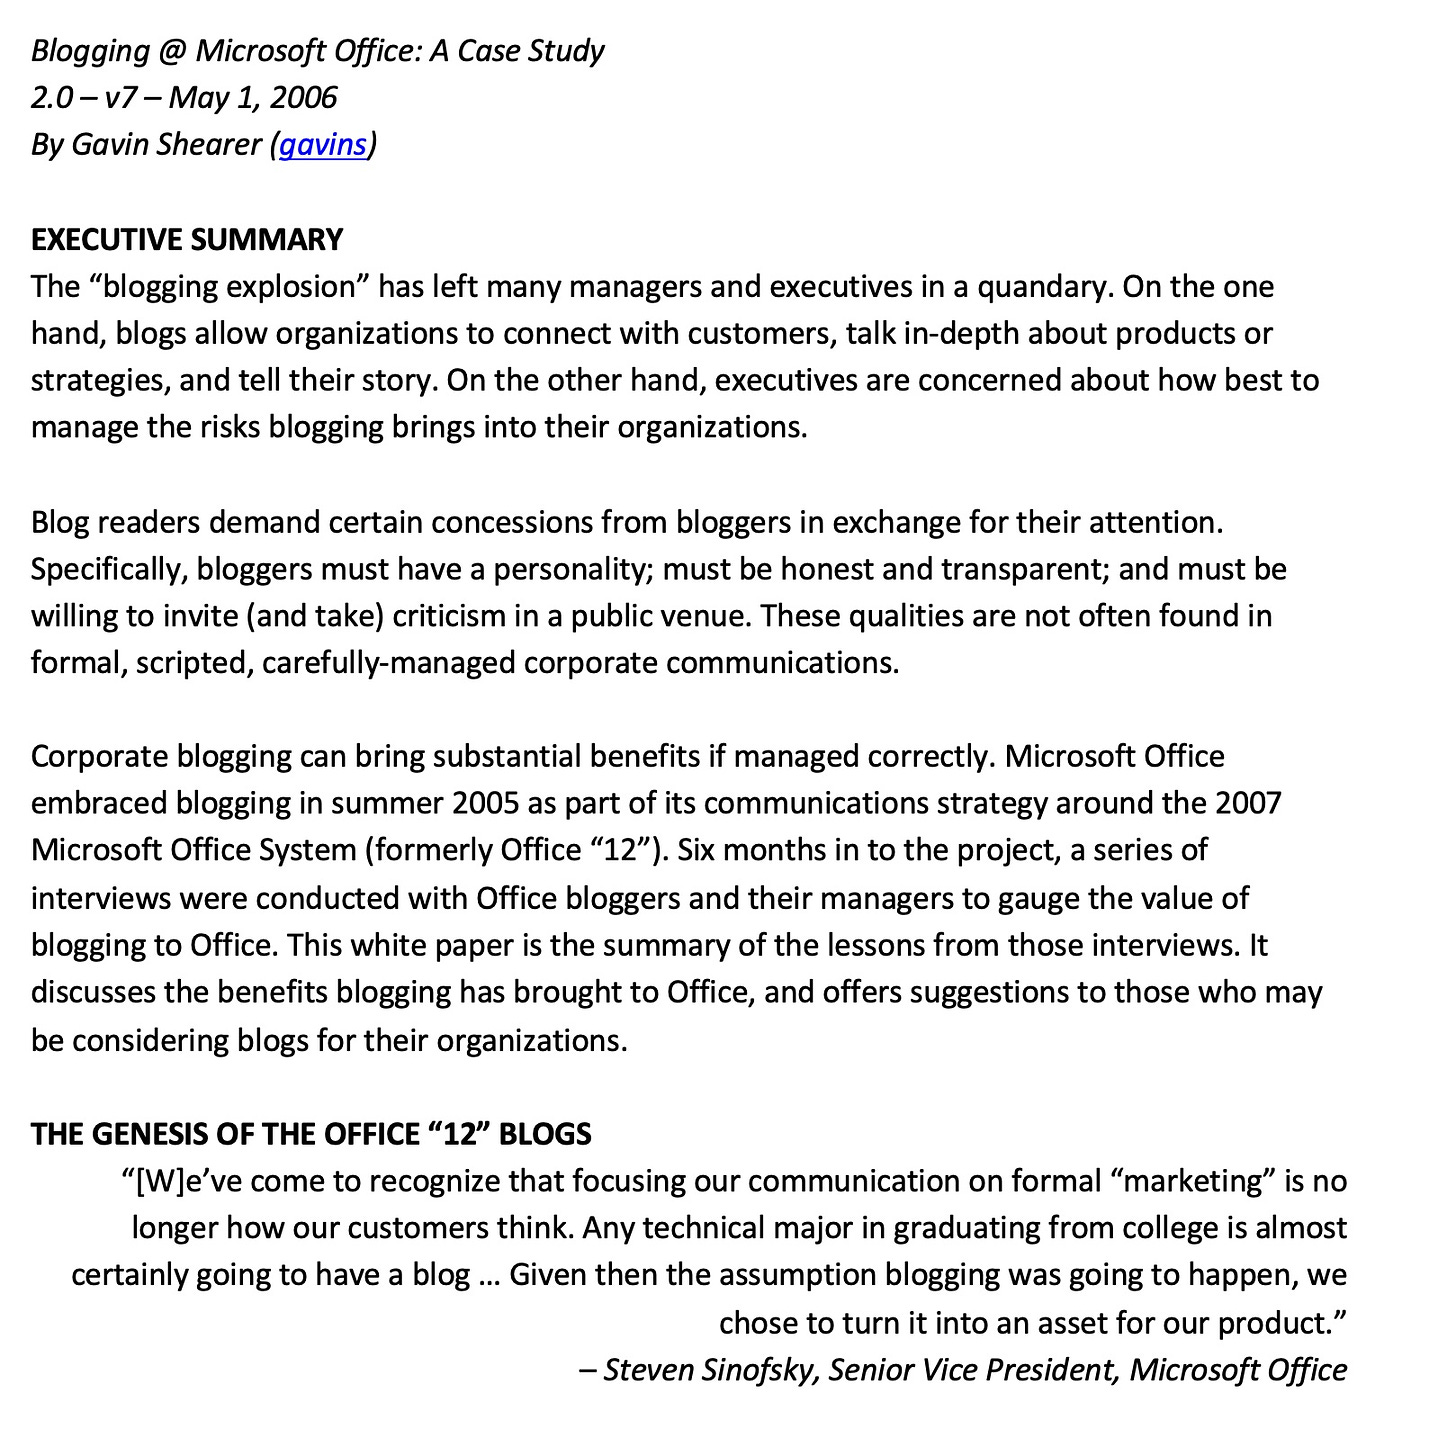 Blogging @ Microsoft Office: A Case Study 2.0 - v7 - May 1, 2006 By Gavin Shearer (gavins) EXECUTIVE SUMMARY The "blogging explosion" has left many managers and executives in a quandary. On the one hand, blogs allow organizations to connect with customers, talk in-depth about products or strategies, and tell their story. On the other hand, executives are concerned about how best to manage the risks blogging brings into their organizations. Blog readers demand certain concessions from bloggers in exchange for their attention. Specifically, bloggers must have a personality; must be honest and transparent; and must be willing to invite (and take) criticism in a public venue. These qualities are not often found in formal, scripted, carefully-managed corporate communications. Corporate blogging can bring substantial benefits if managed correctly. Microsoft Office embraced blogging in summer 2005 as part of its communications strategy around the 2007 Microsoft Office System (formerly Office "12"). Six months in to the project, a series of interviews were conducted with Office bloggers and their managers to gauge the value of blogging to Office. This white paper is the summary of the lessons from those interviews. It discusses the benefits blogging has brought to Office, and offers suggestions to those who may be considering blogs for their organizations. THE GENESIS OF THE OFFICE "12" BLOGS "[We've come to recognize that focusing our communication on formal "marketing" '" is no longer how our customers think. Any technical major in graduating from college is almost certainly going to have a blog ... Given then the assumption blogging was going to happen, we chose to turn it into an asset for our product." - Steven Sinofsky, Senior Vice President, Microsoft Office